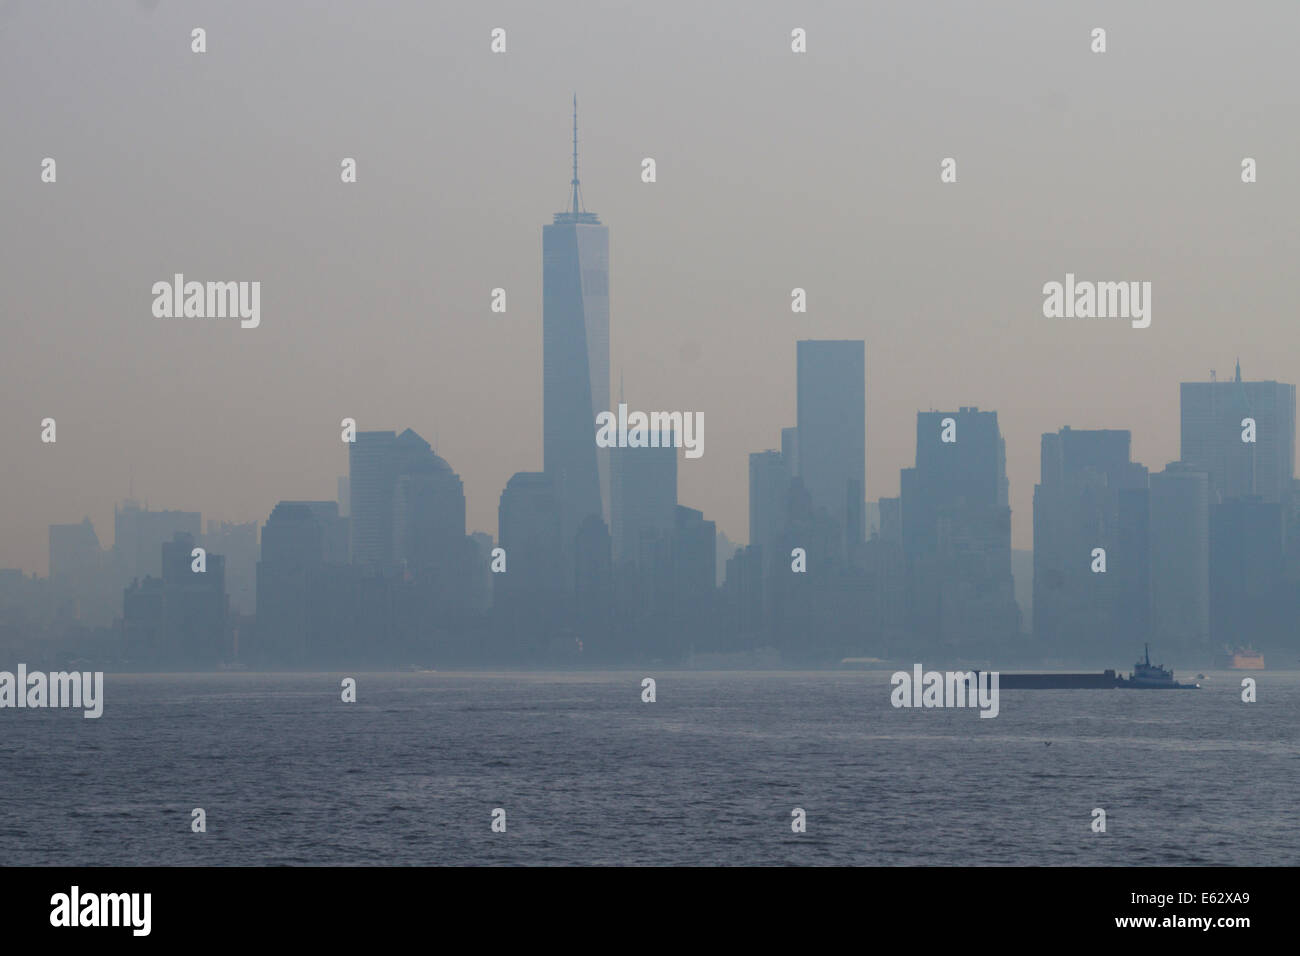 New York. Manhattan seen through fog. One world trade center building dominates the skyline. A tug and a boat in foreground. Stock Photo